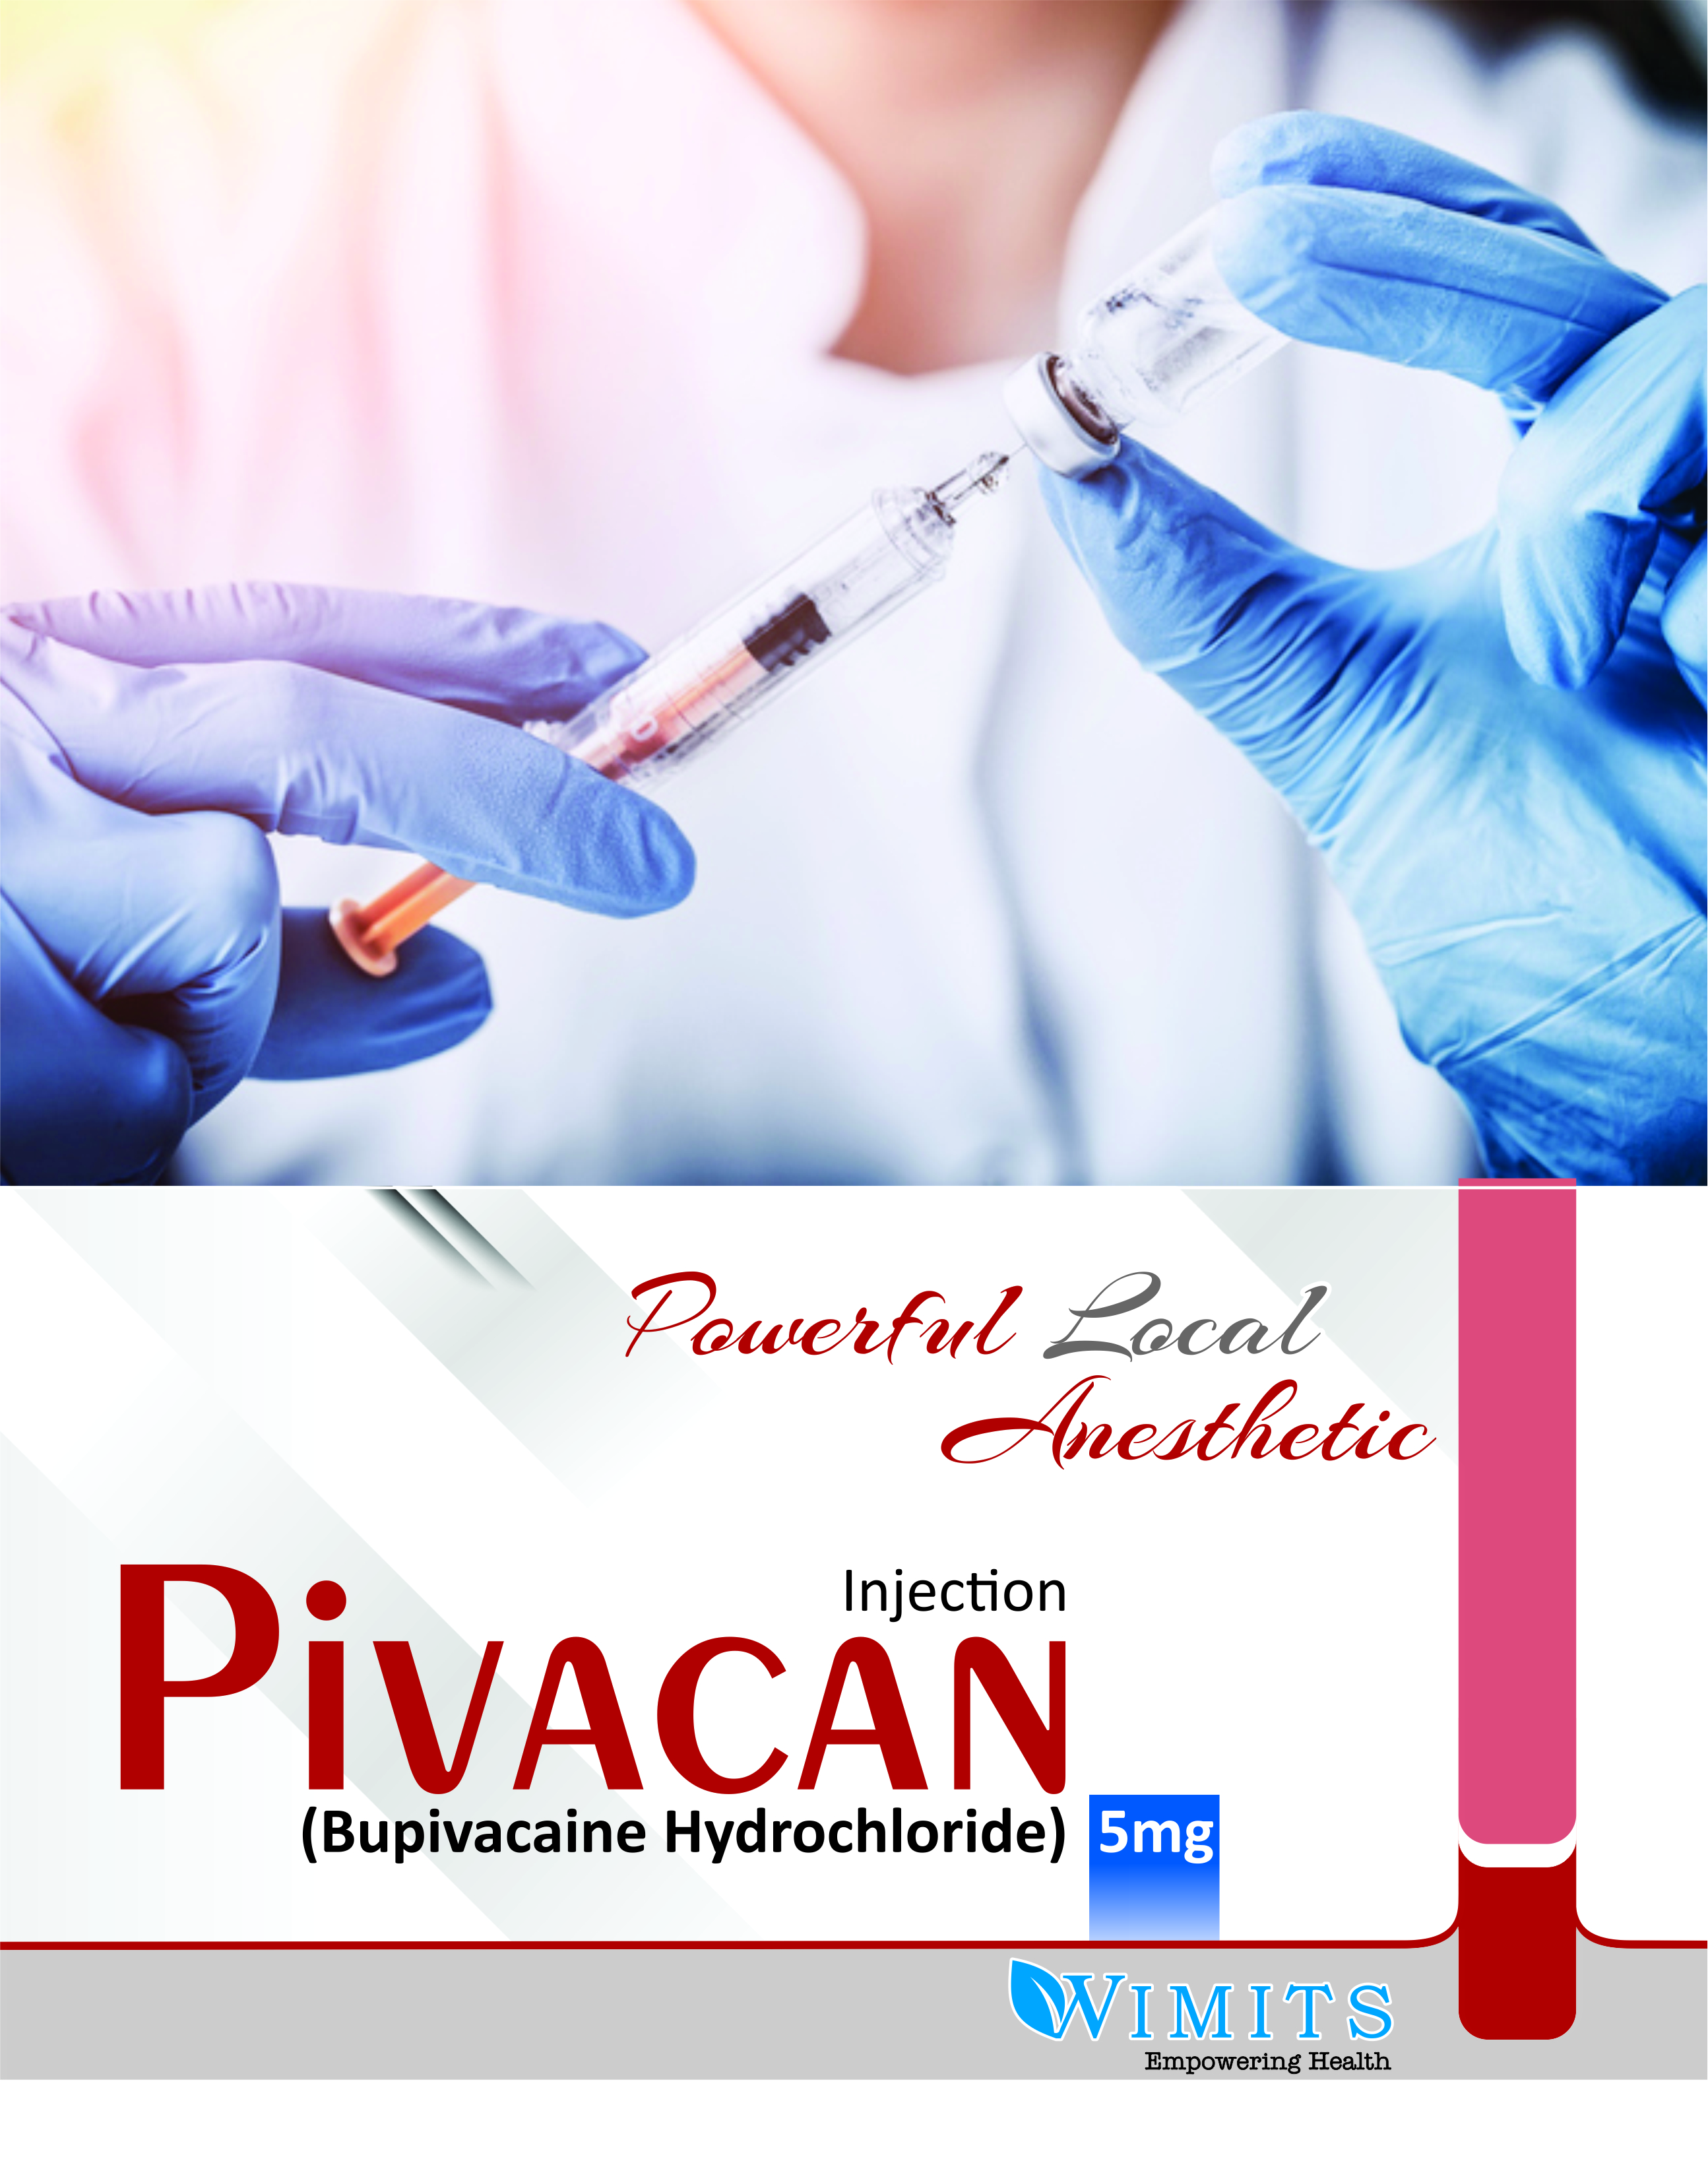 Pivacan